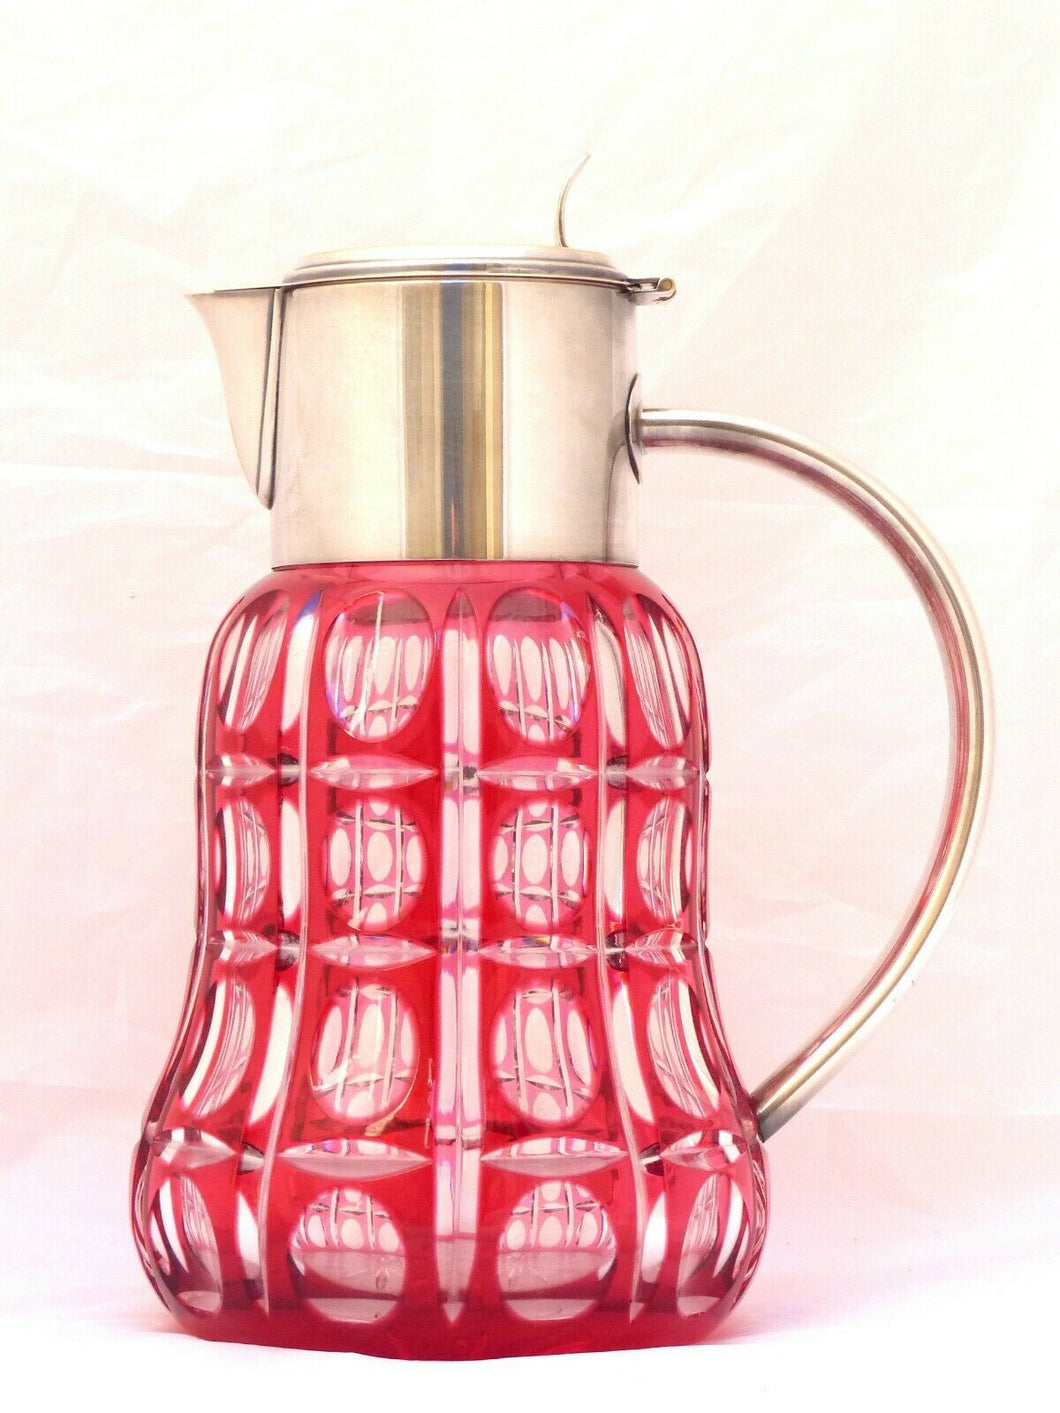 SAINT ST LOUIS Huge Water Jug Pitcher RUBY Cut Crystal Silver Plate Antique 19TH